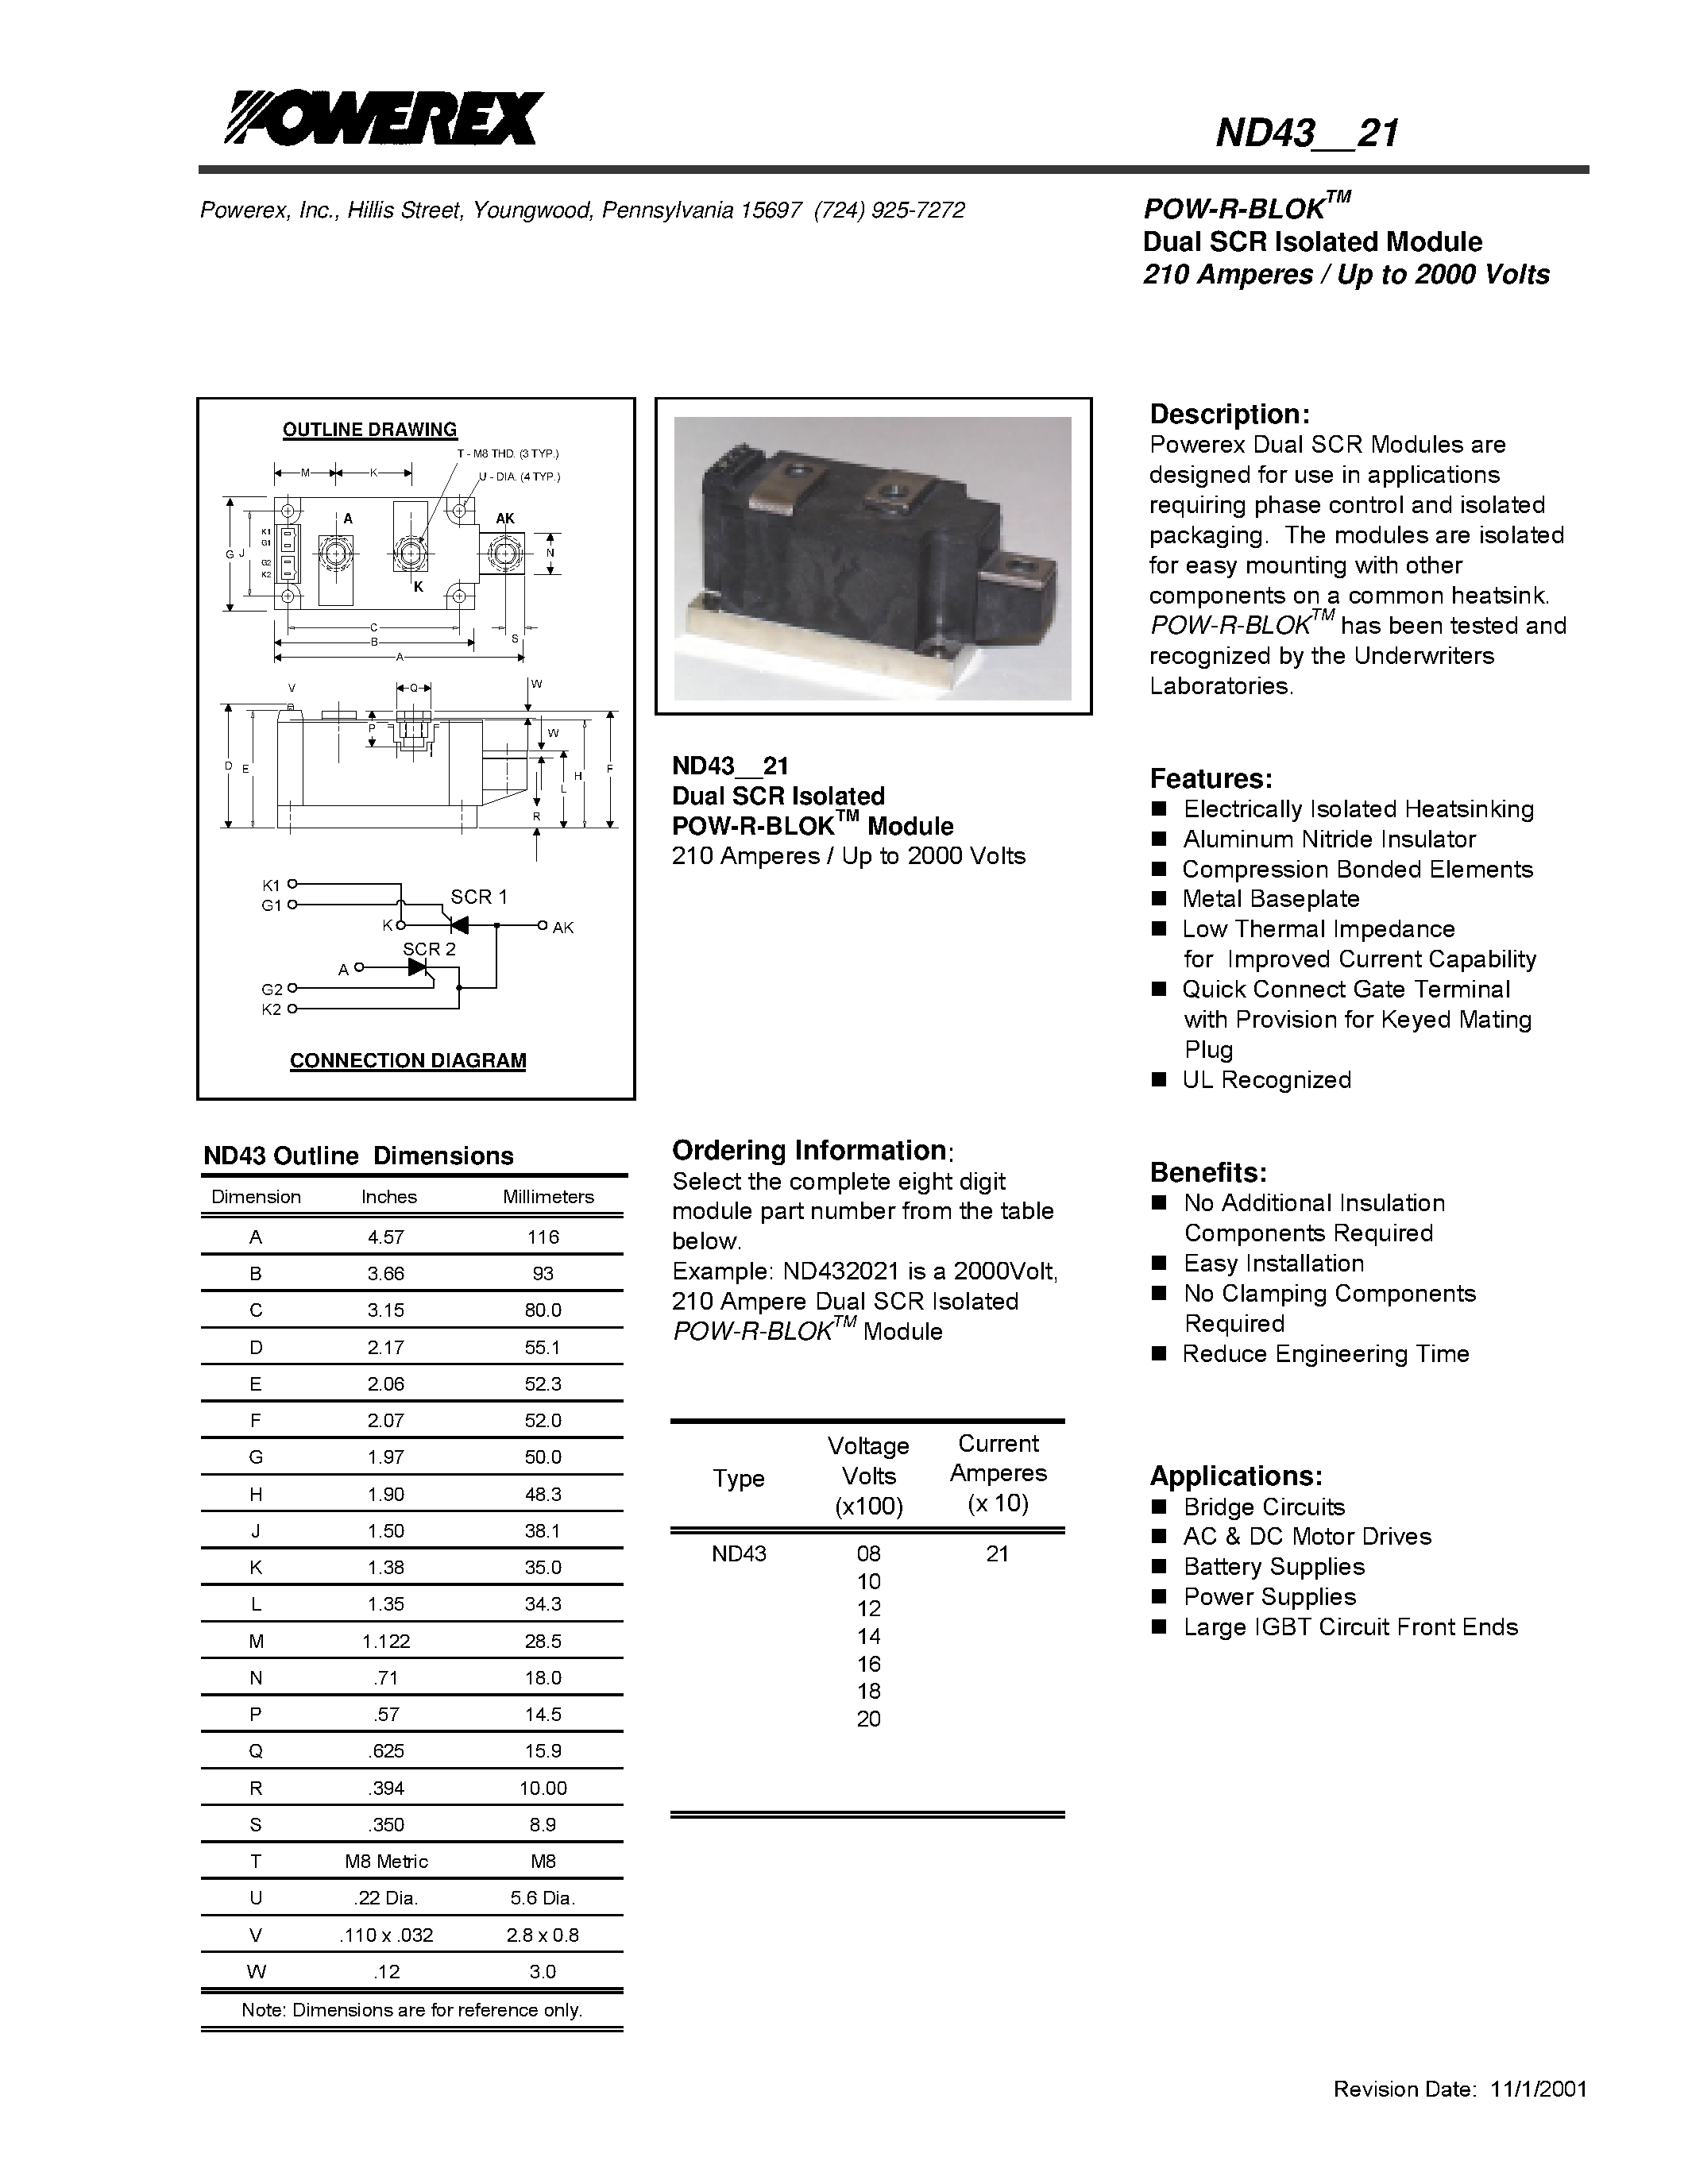 Datasheet ND431621 - POW-R-BLOK Dual SCR Isolated Module (210 Amperes / Up to 2000 Volts) page 1